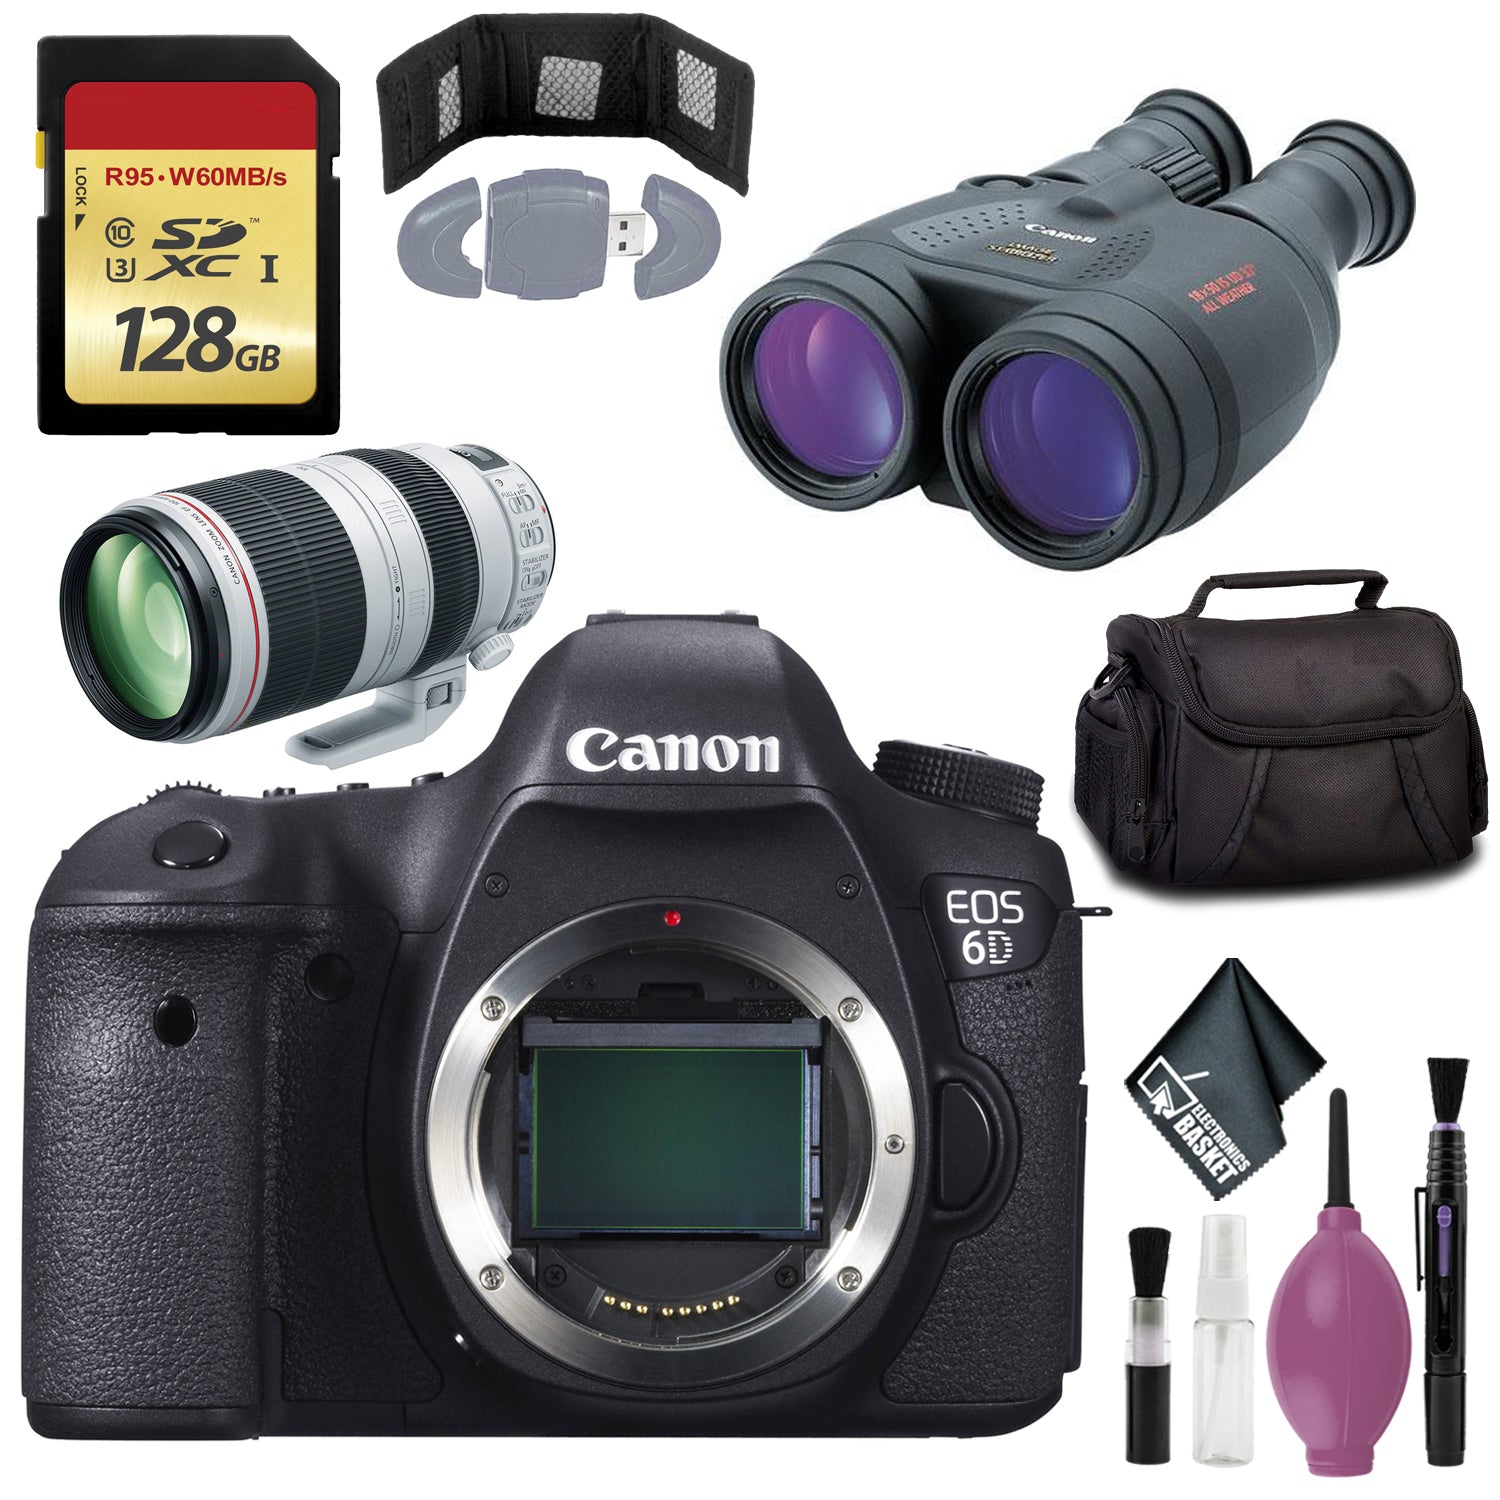 Canon 18x50 IS Image Stabilized Binocular - CANON EOS 6D PRO DIG CAMERA - 100-400MM F/4.5-5.6L IS II USM LENS